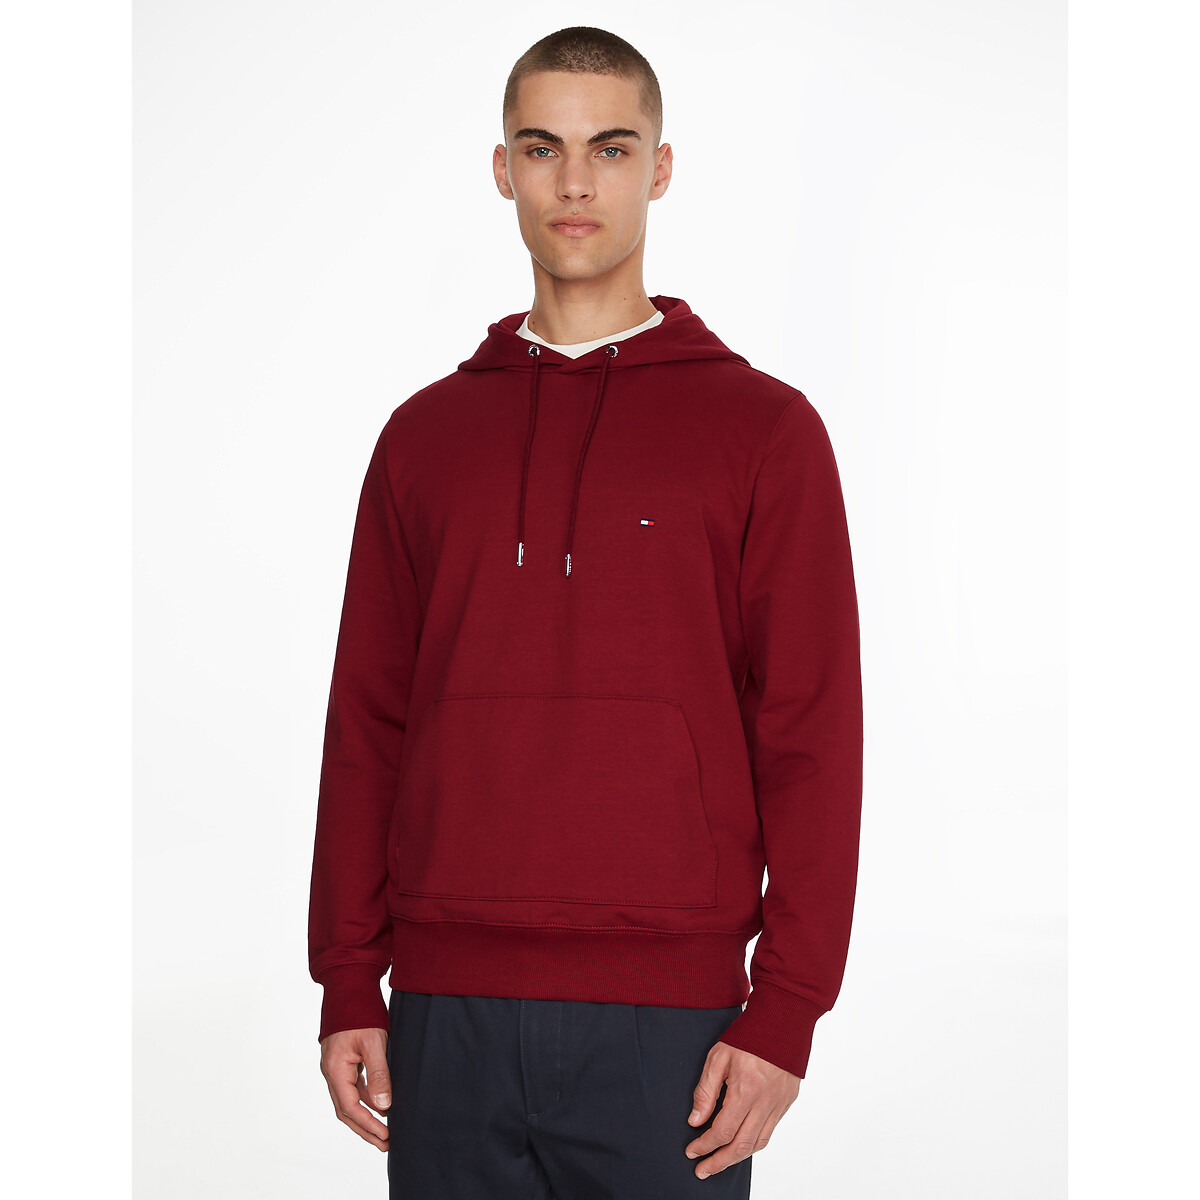 Tommy 1985 cotton hoodie, burgundy, Tommy Hilfiger | La Redoute